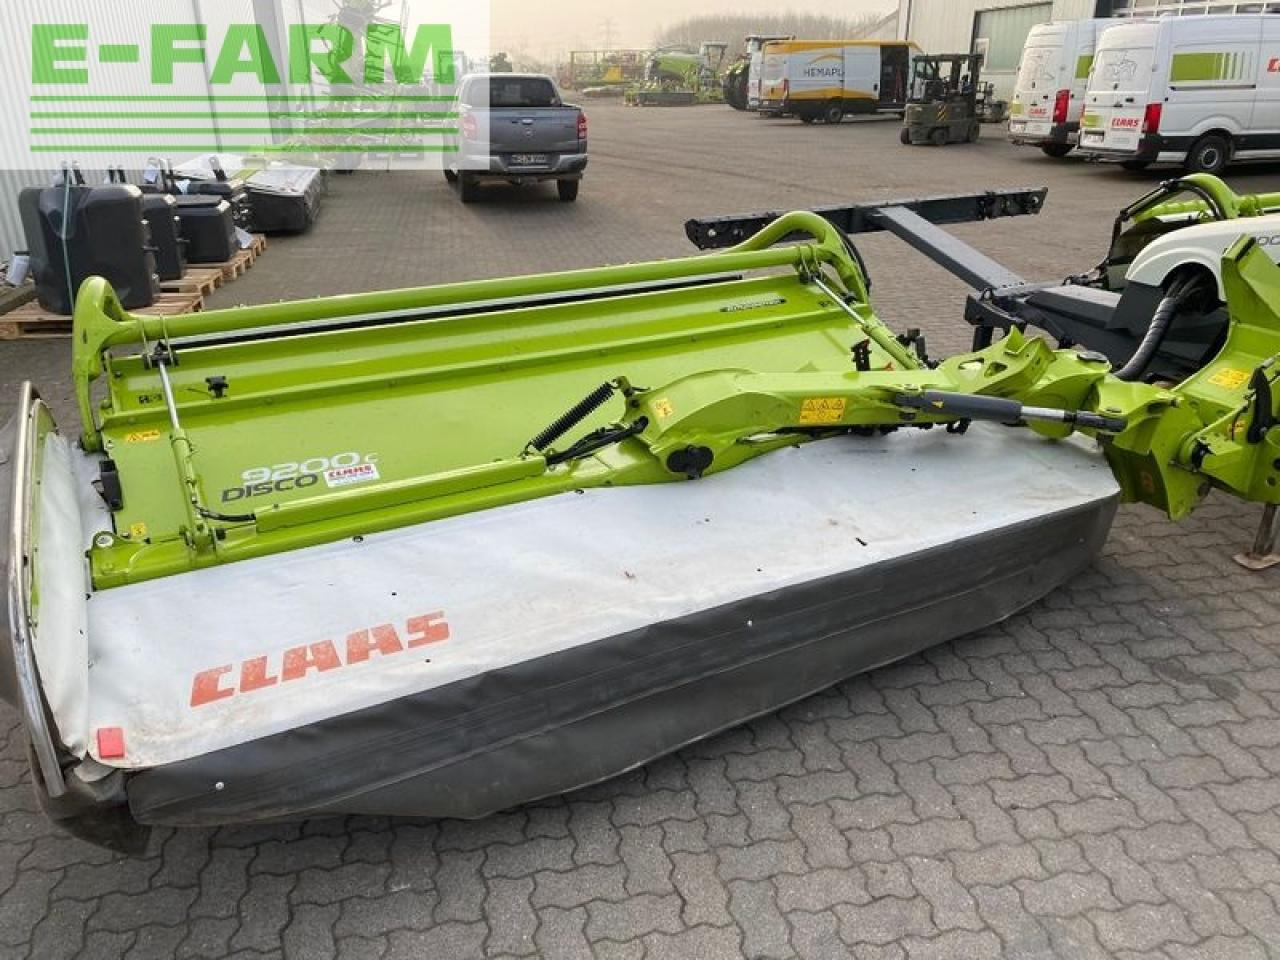 Mower CLAAS disco 9200 c as: picture 21